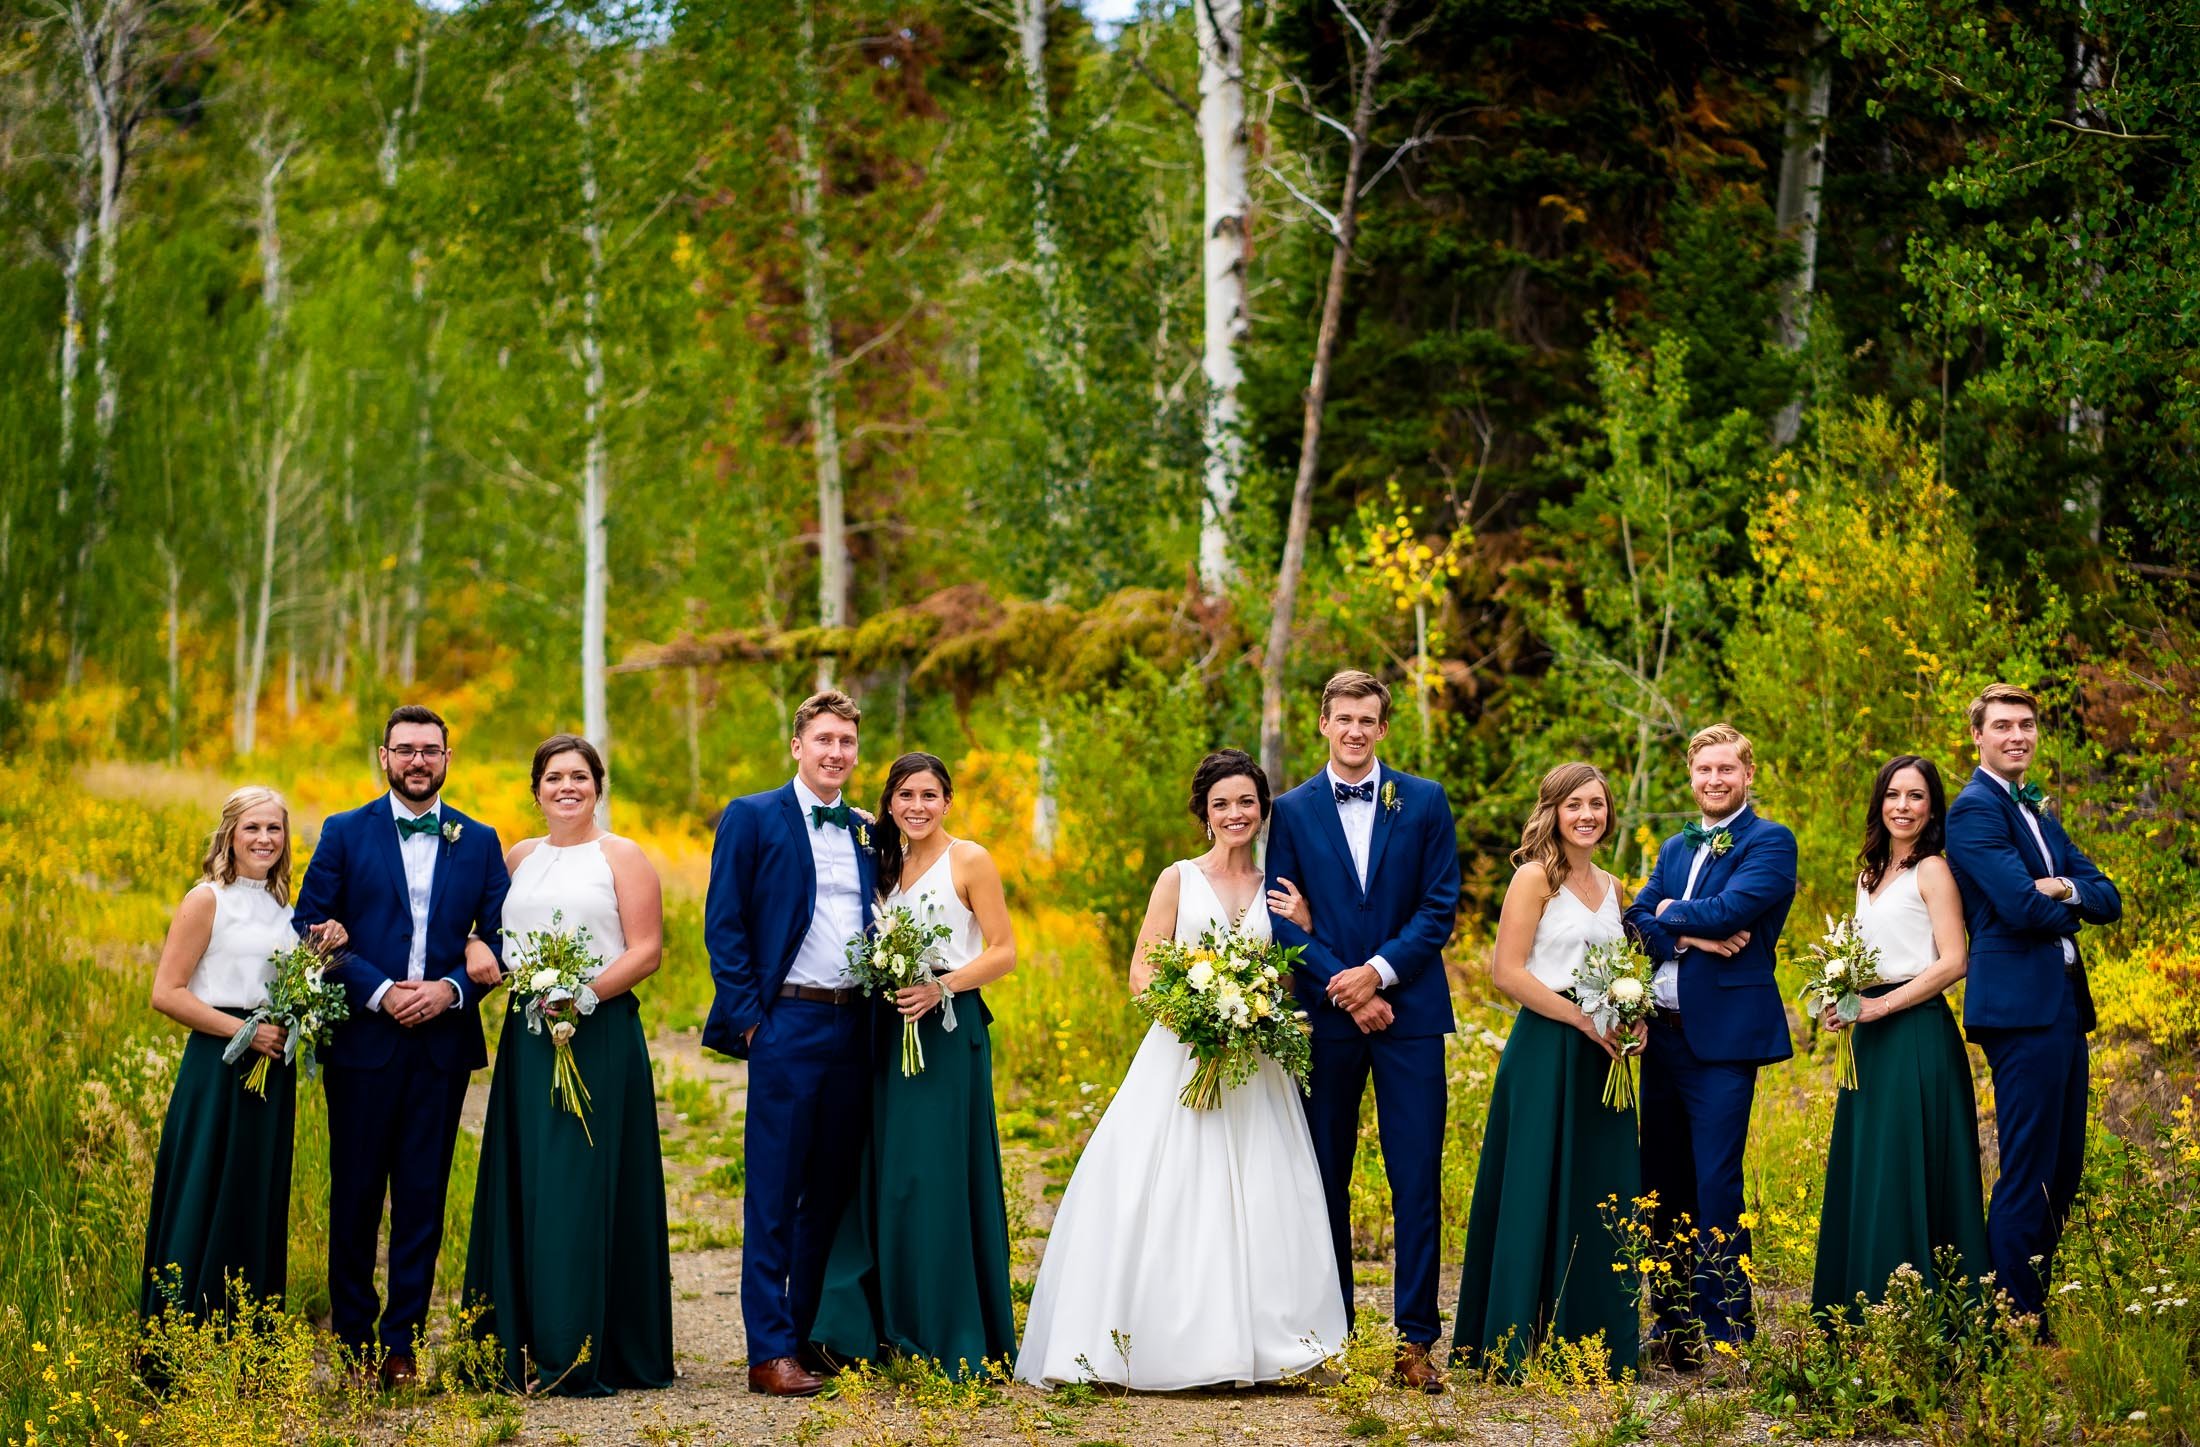 Bride and groom pose for a portrait with their wedding party portrait surrounded by aspens in a meadow, wedding, wedding photos, wedding photography, wedding photographer, wedding inspiration, wedding photo inspiration, wedding portraits, wedding ceremony, wedding reception, mountain wedding, Catholic Church wedding, Catholic Church wedding photos, Catholic Church wedding photography, Catholic Church wedding photographer, Catholic Church wedding inspiration, Catholic Church wedding venue, Steamboat Springs wedding, Steamboat Springs wedding photos, Steamboat Springs wedding photography, Steamboat Springs wedding photographer, Colorado wedding, Colorado wedding photos, Colorado wedding photography, Colorado wedding photographer, Colorado mountain wedding, Colorado wedding inspiration